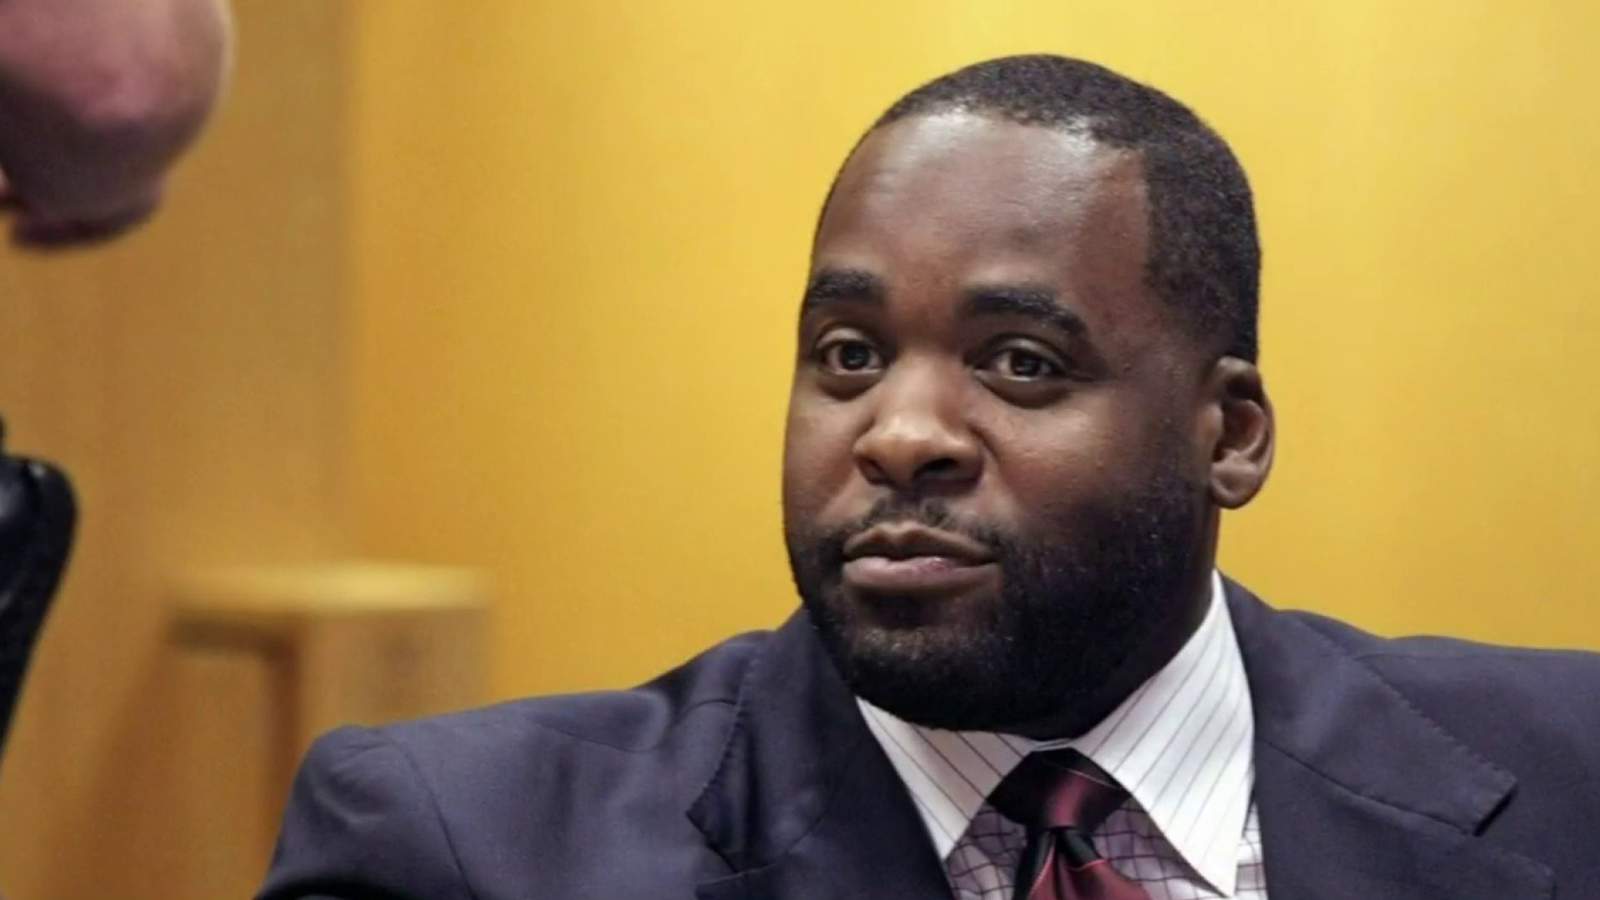 Kwame Kilpatrick’s prison sentence commuted by Trump -- here’s what to know